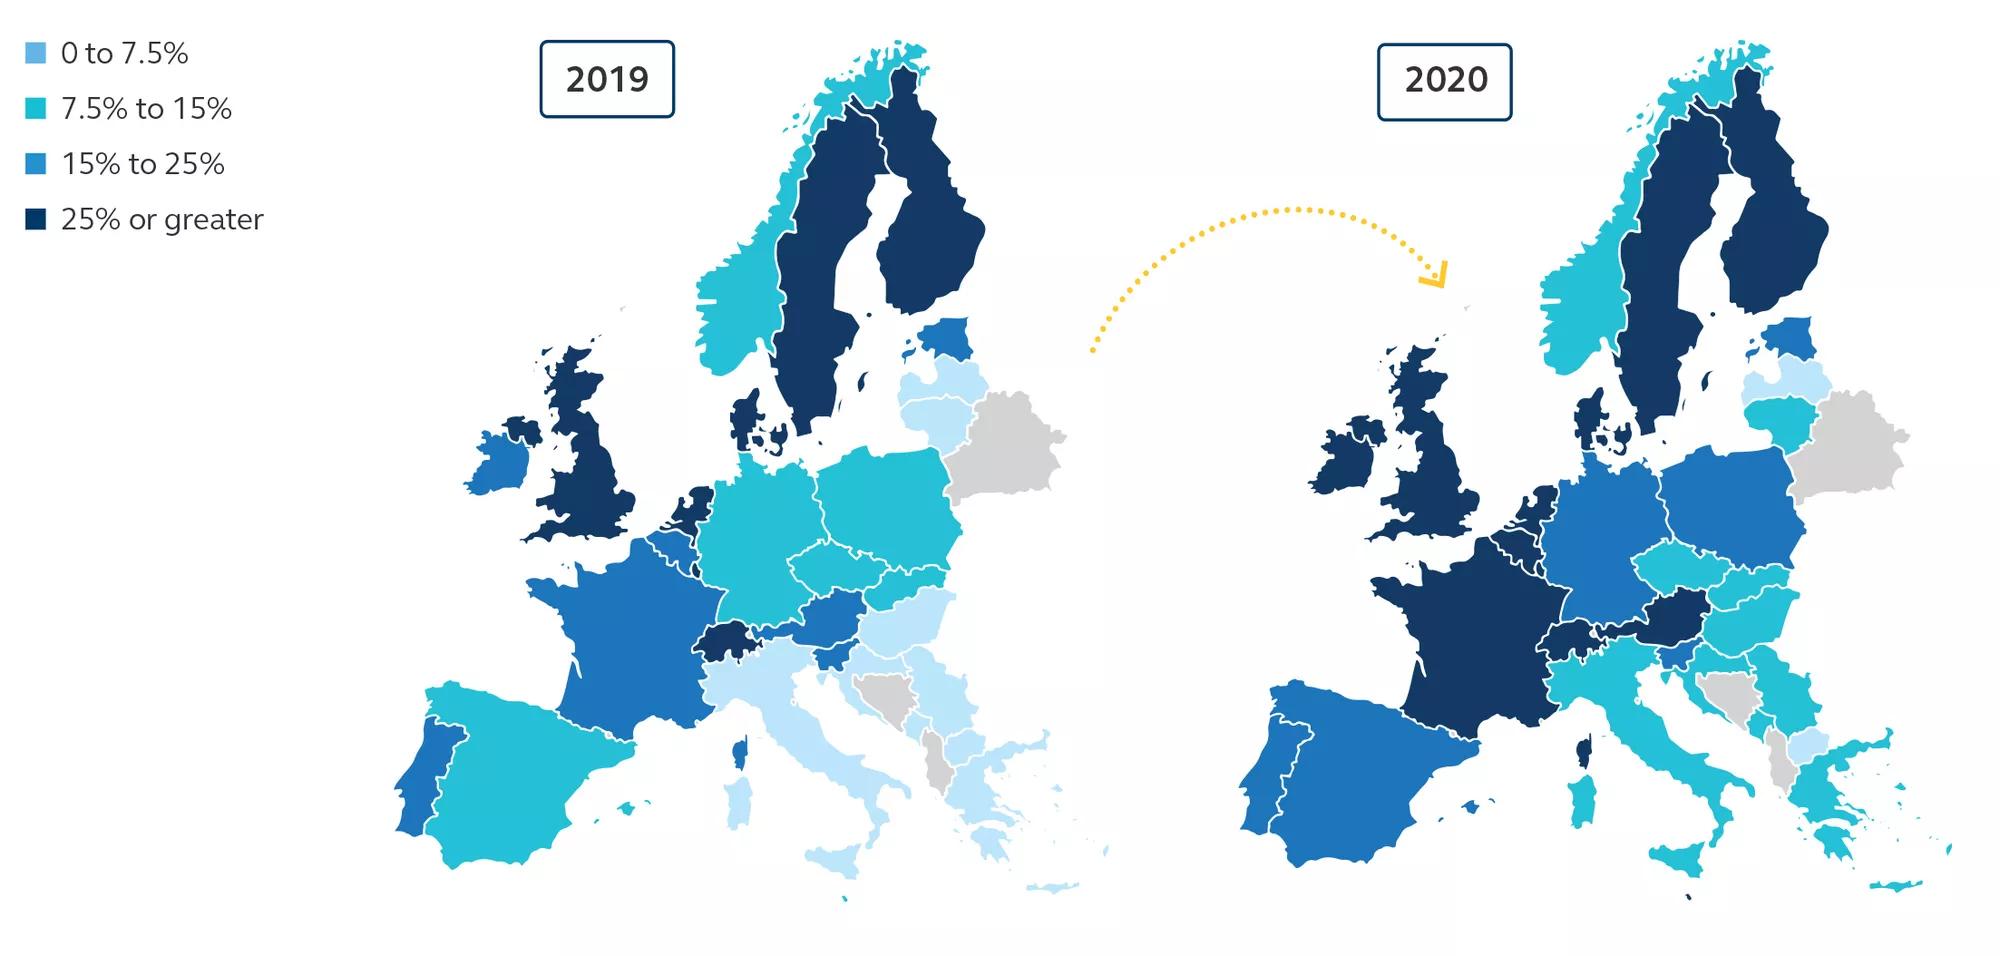 Map detailing what percentage of employed personas worked remotely in 2019 vs. in 2020.